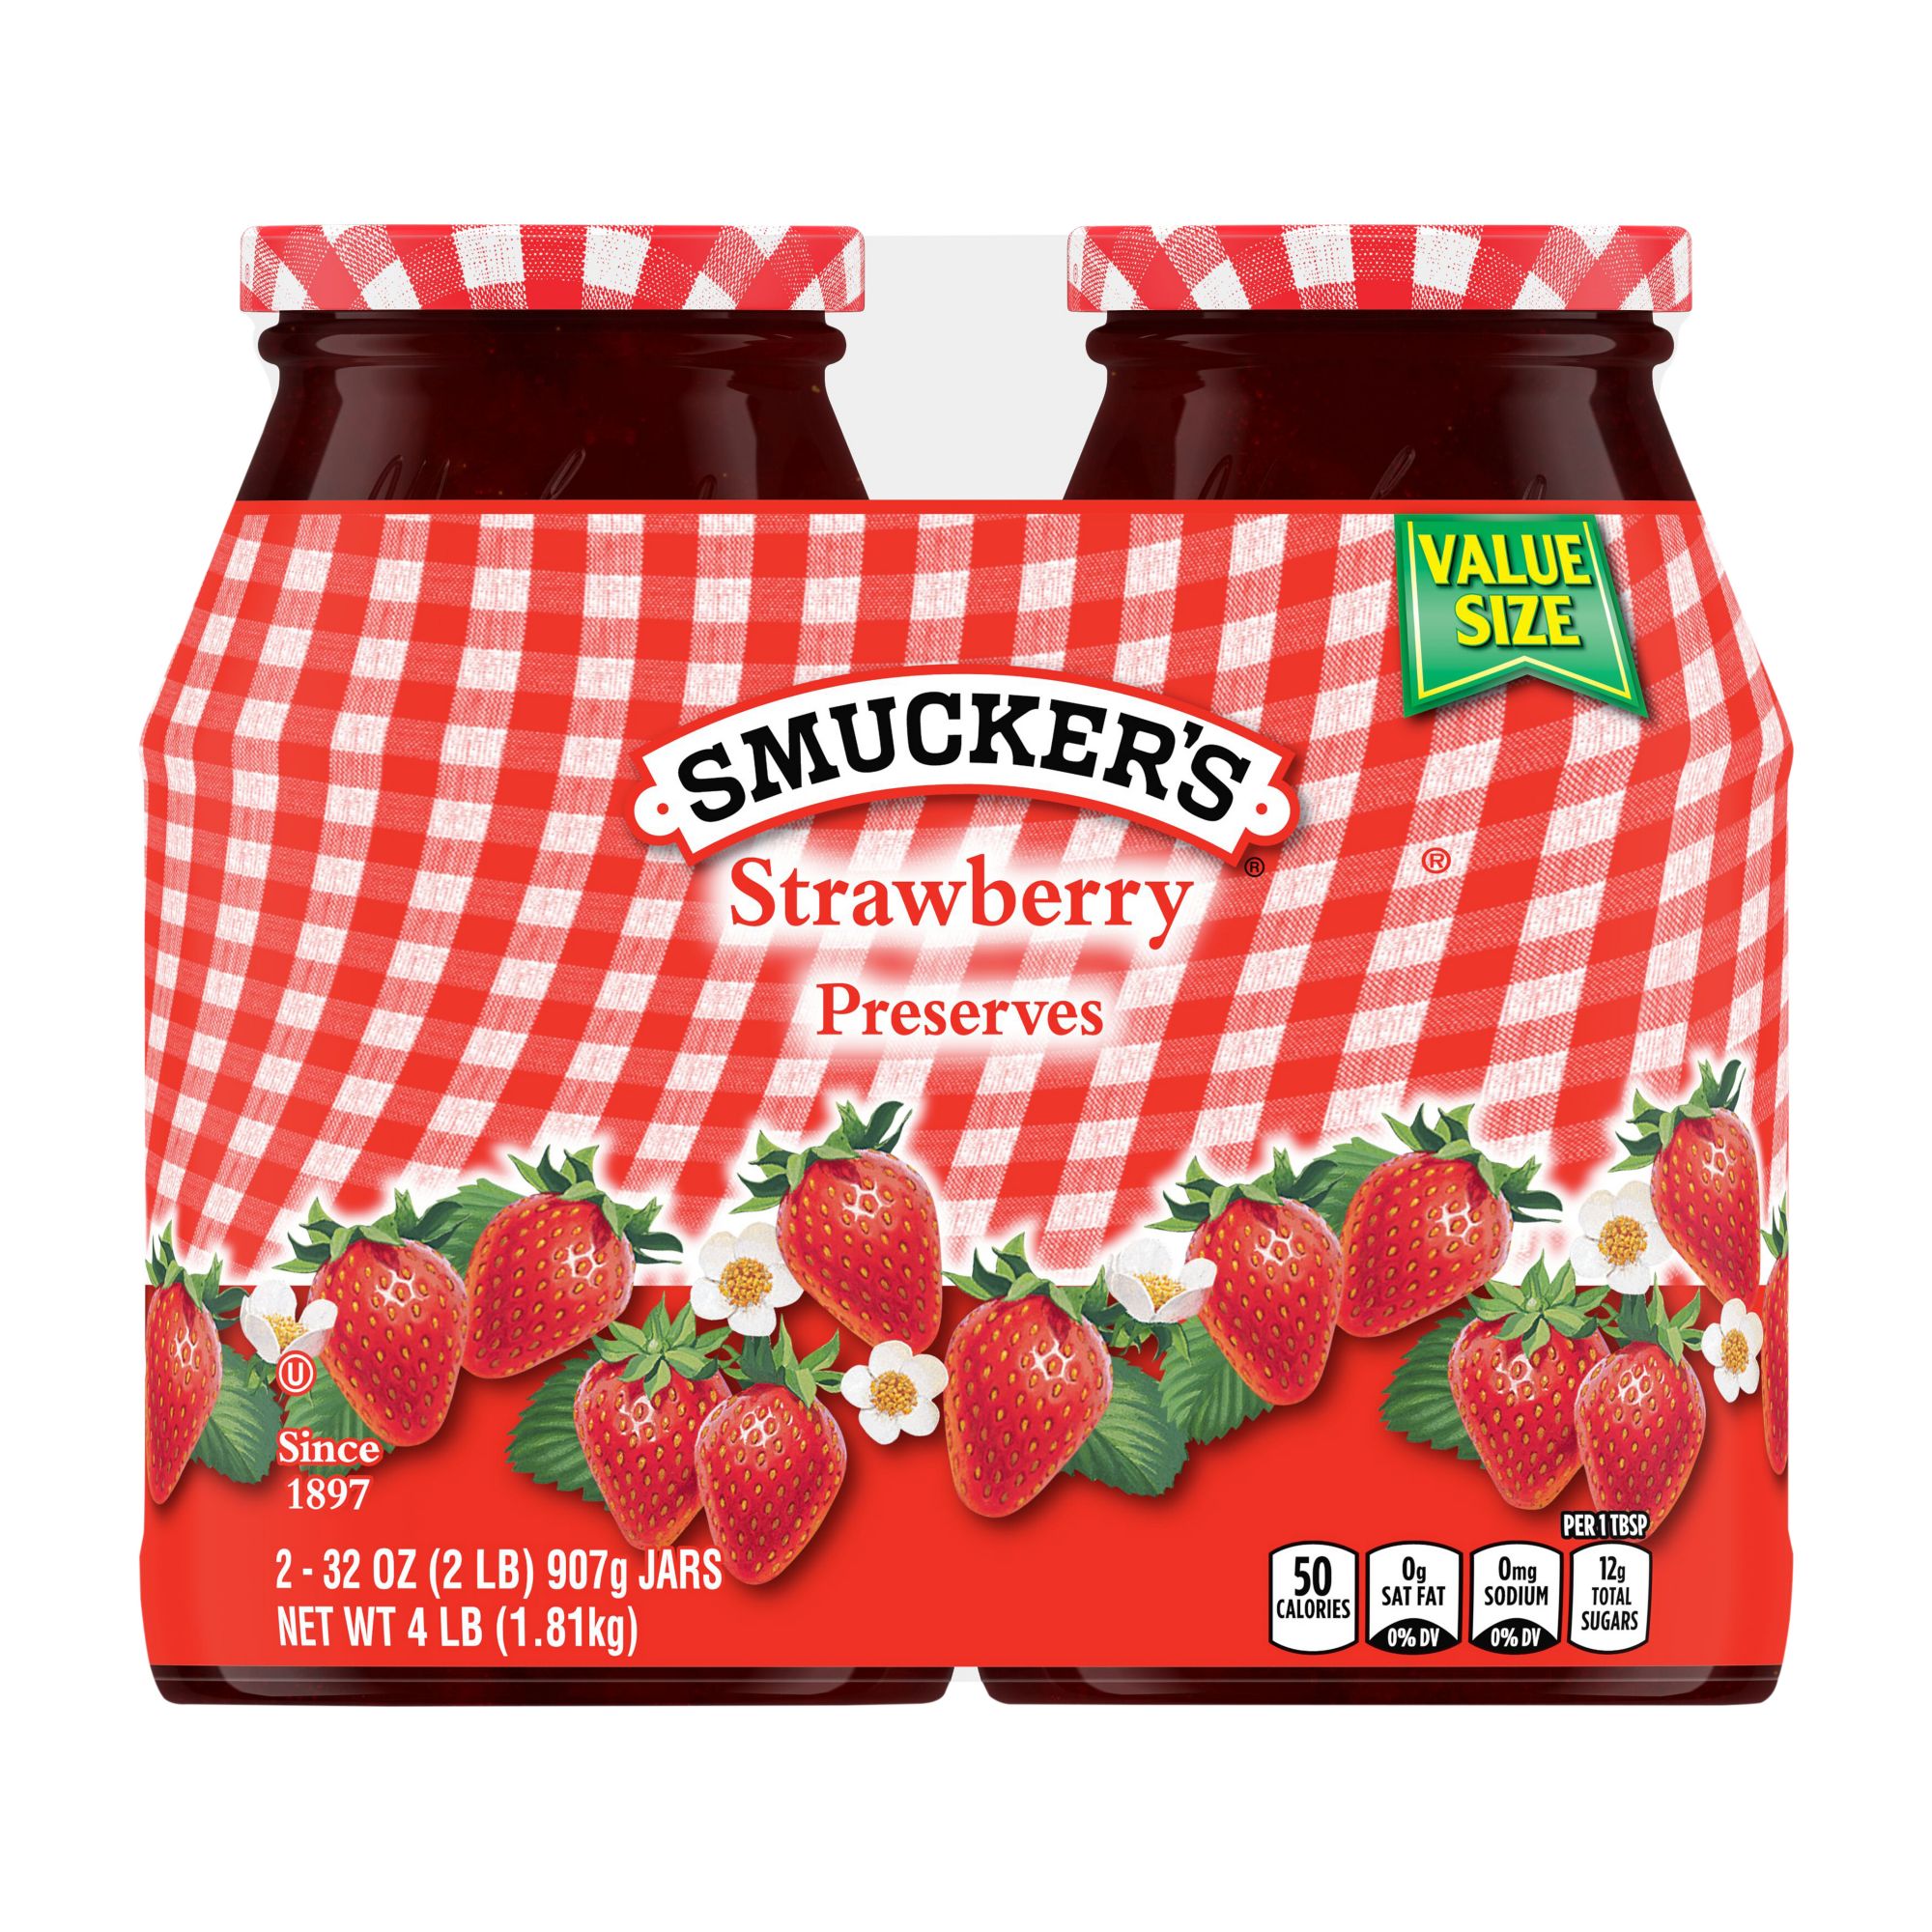 Smucker's Strawberry Jelly, 12 Ounces